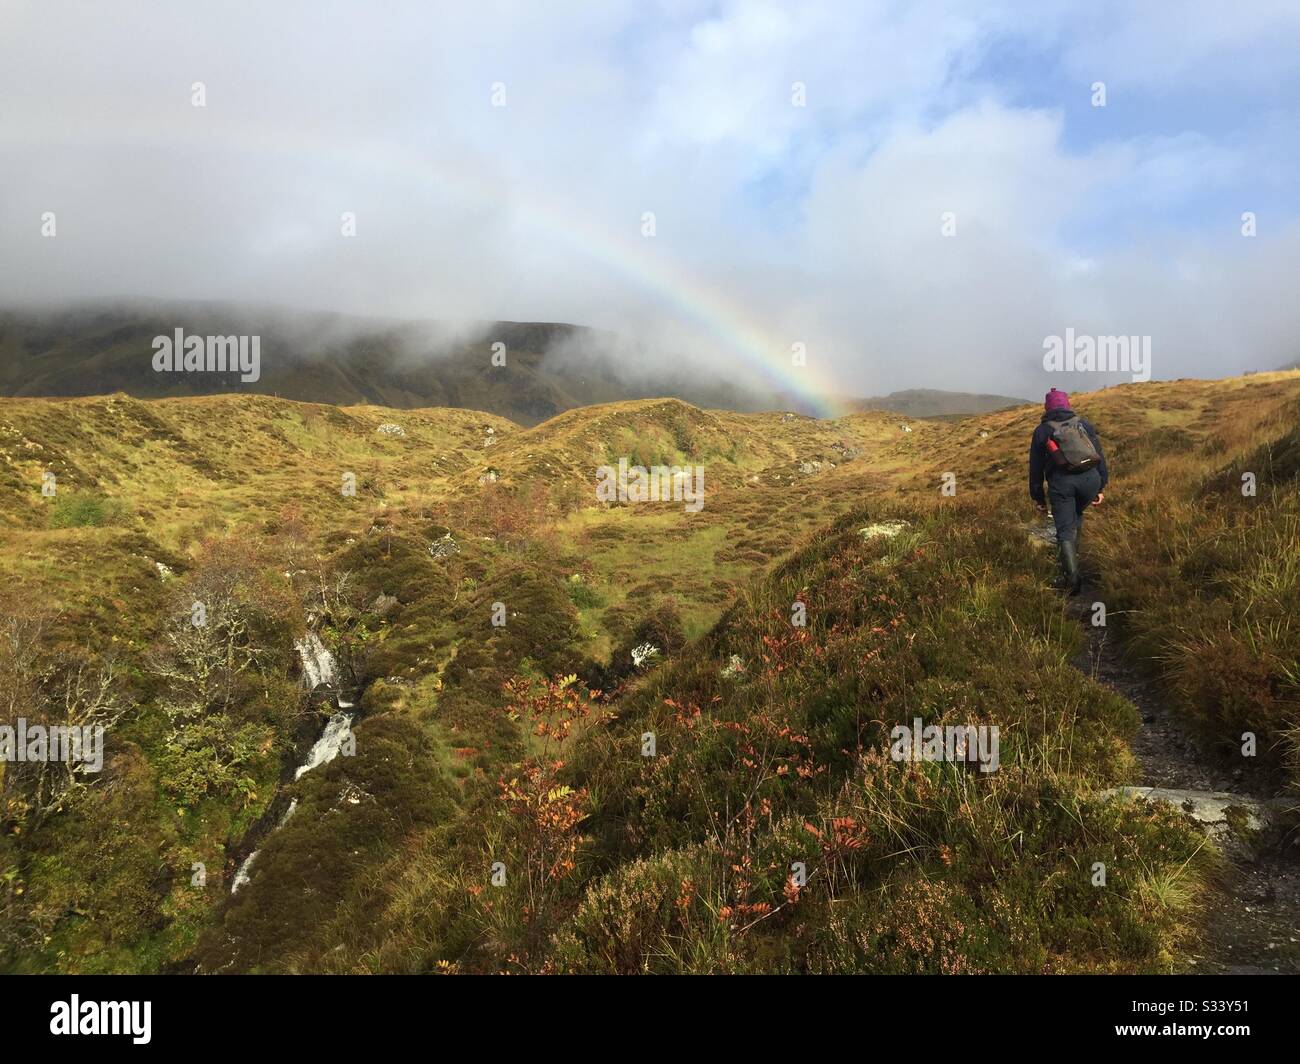 Hiking in Glen Affric, Scotland towards a rainbow in a hilly landscape Stock Photo